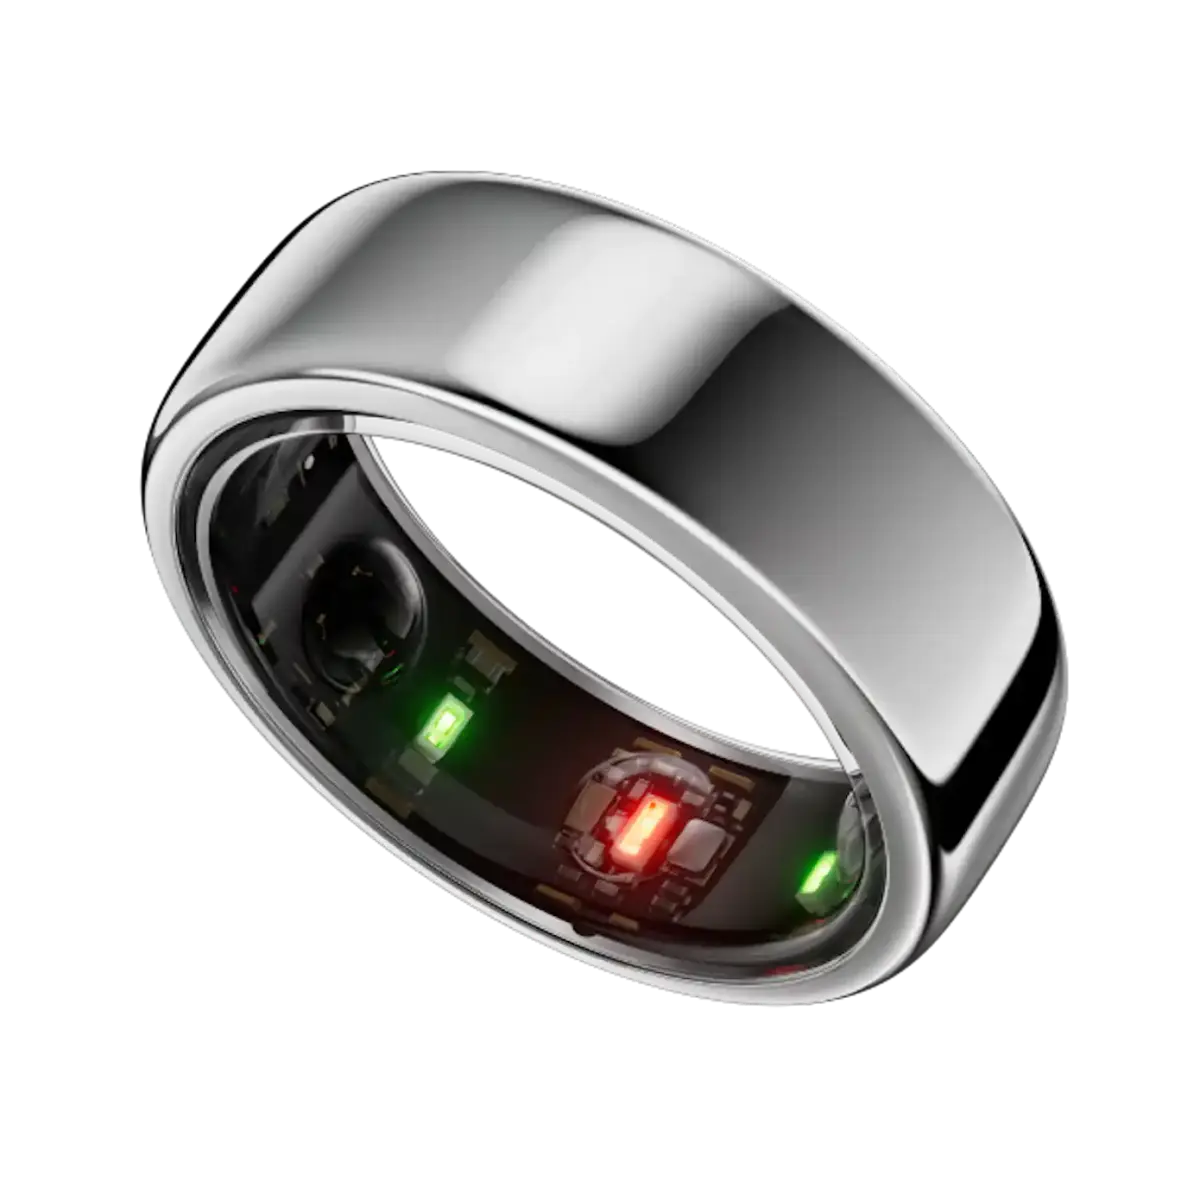 On the Oura Ring Product Launch. I've been really impressed the